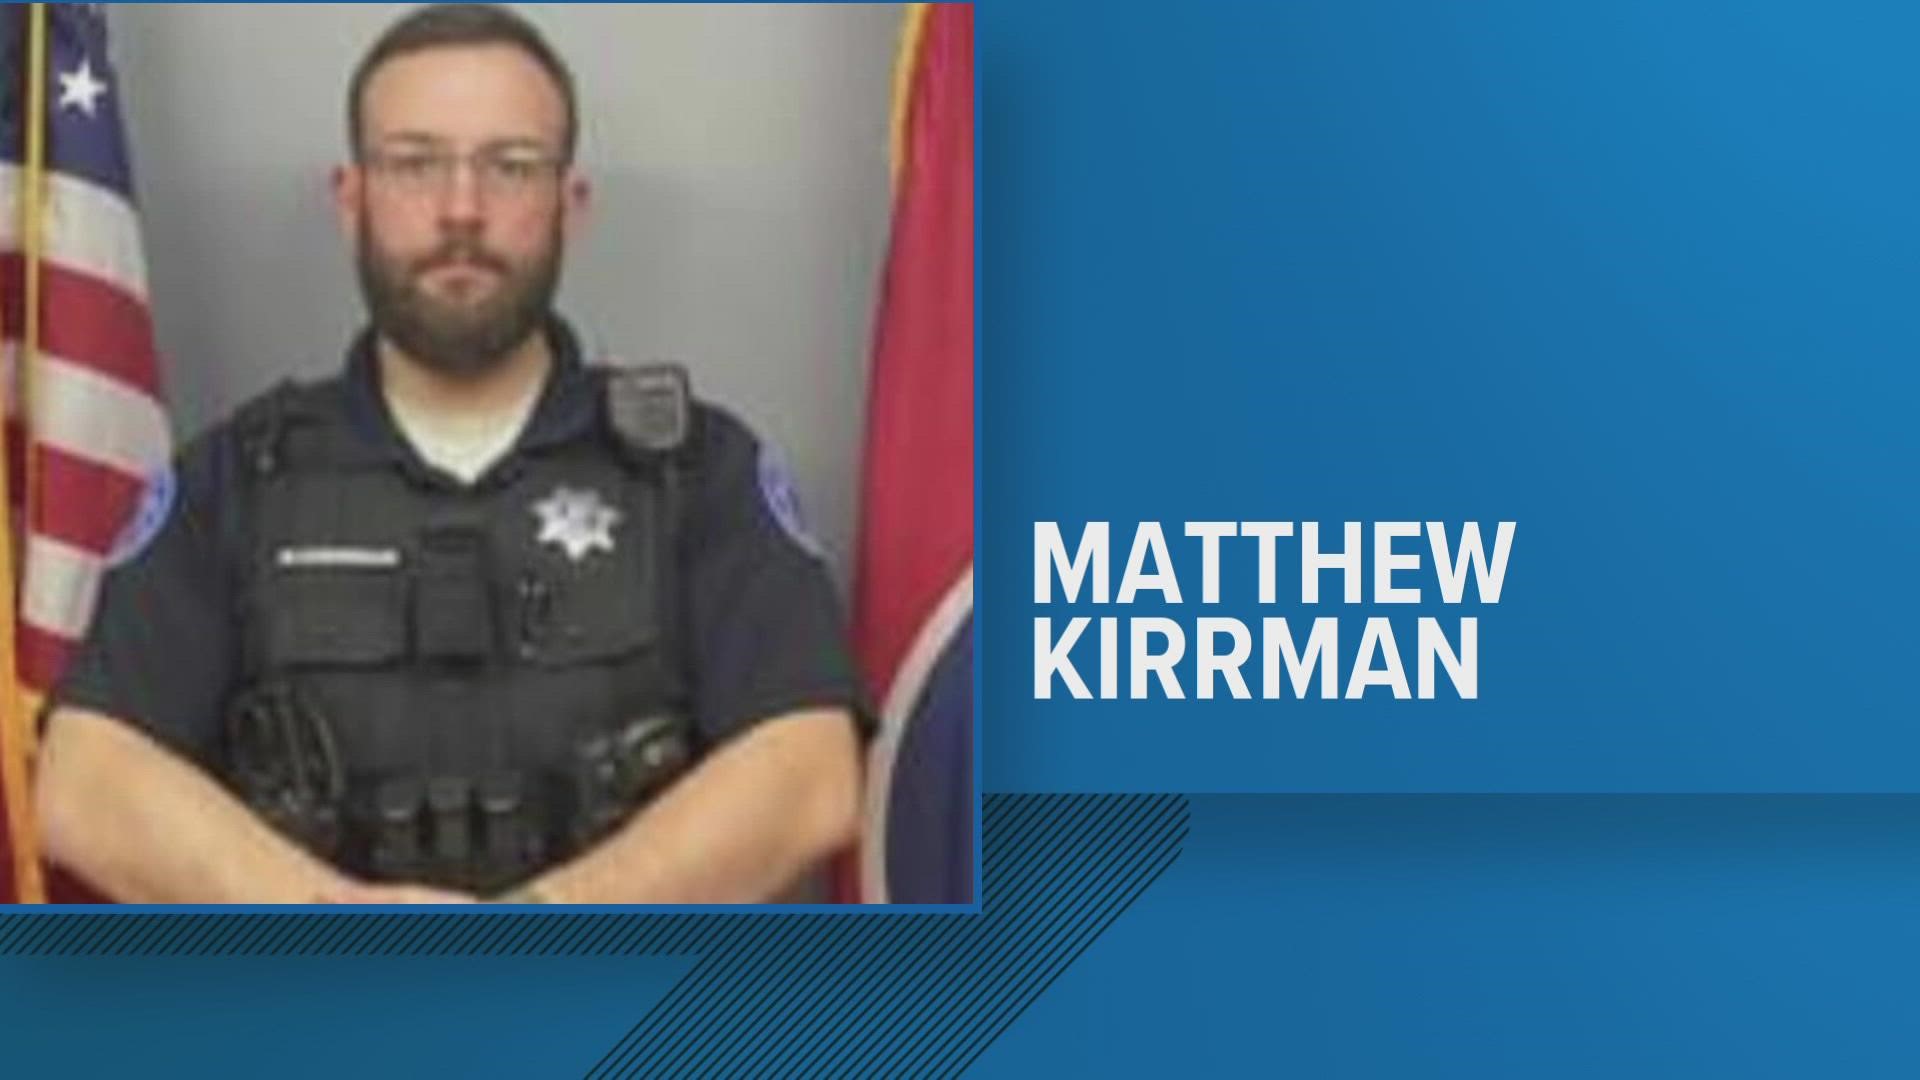 Authorities said 28-year-old Matthew Kirrman was found dead early Sunday in his cruiser.